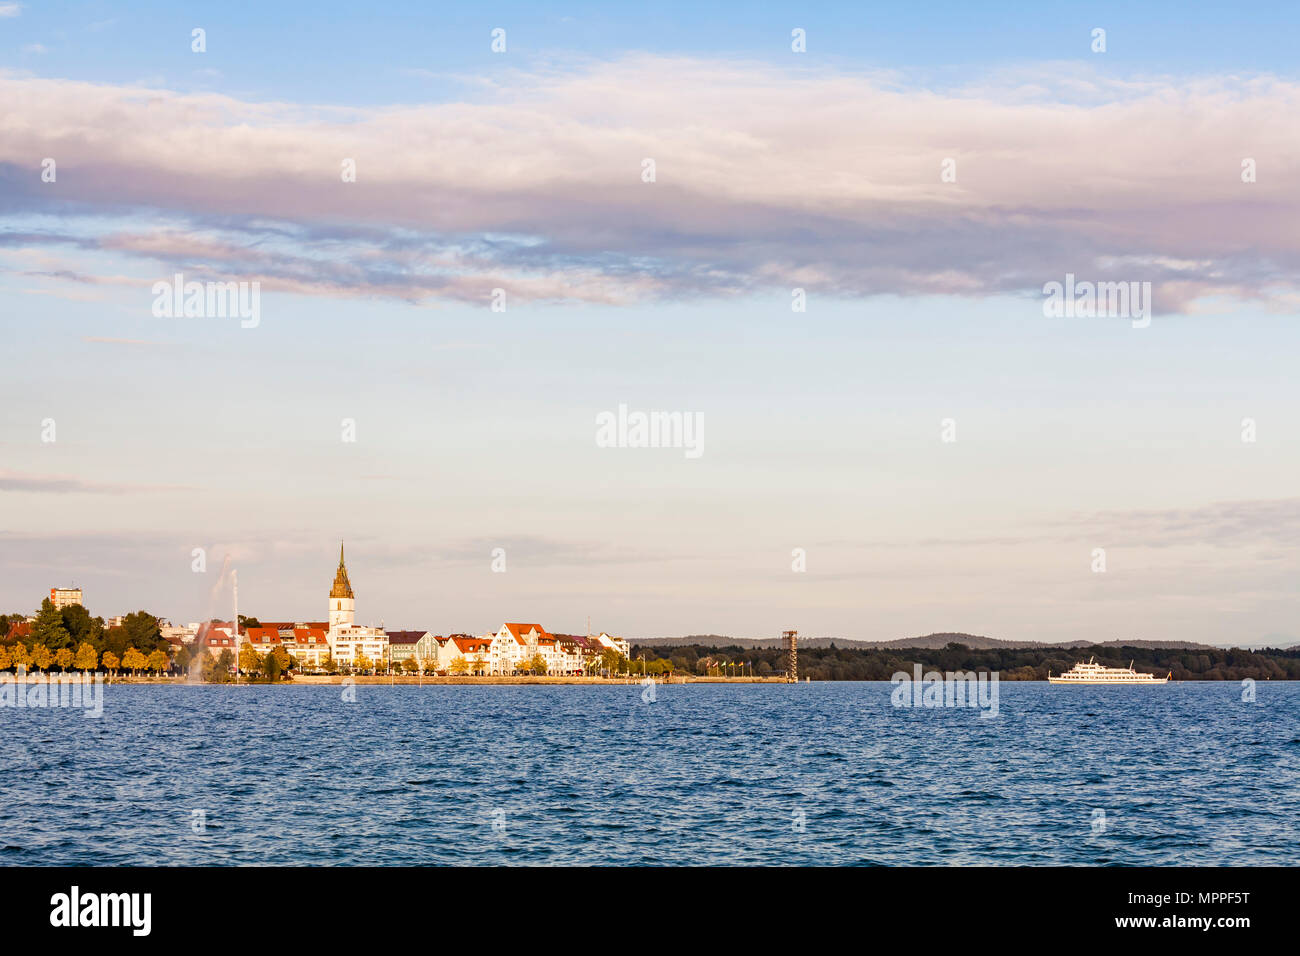 Germany, Baden-Wuerttemberg, Friedrichshafen, Lake Constance, city view and tourboat Stock Photo